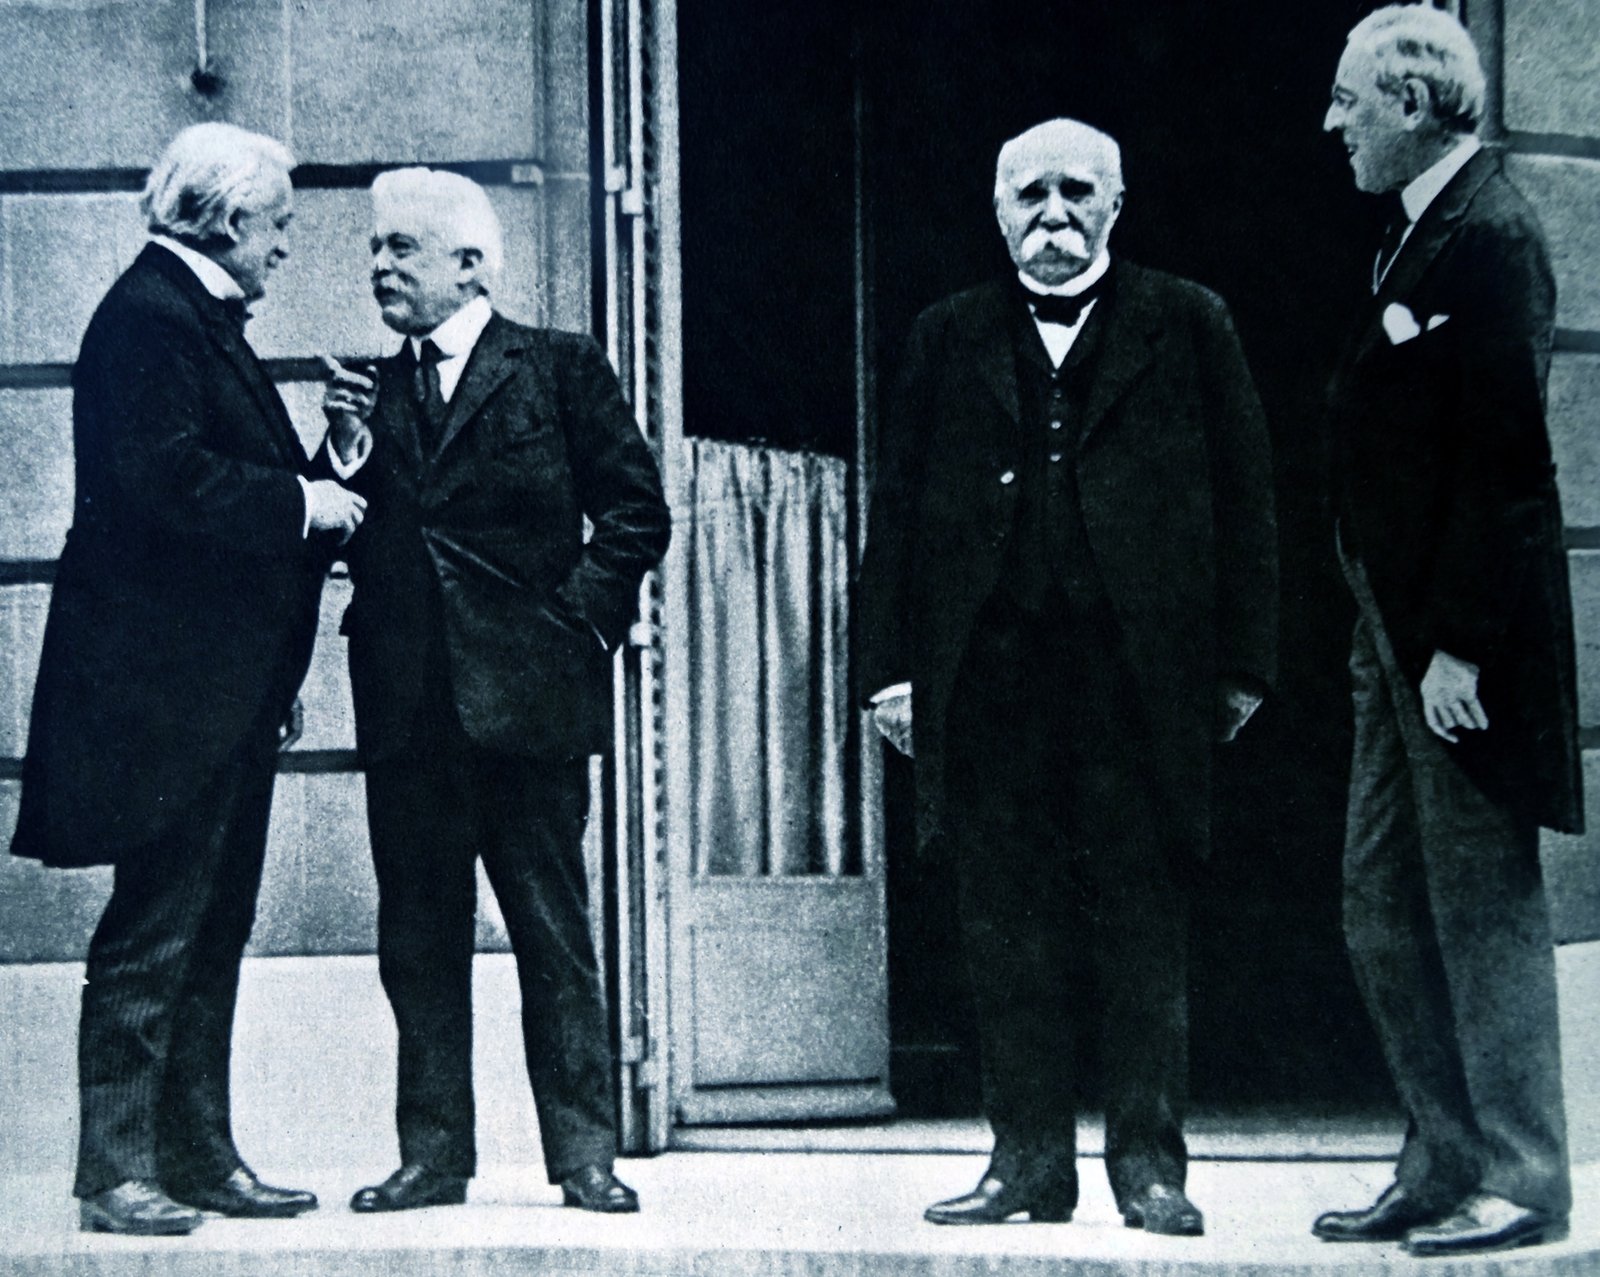 Image - The 'Big Four' winners of the Great War: British Prime Minister David Lloyd-George, Italian Prime Minister Vittorio Orlando, French Prime Minister Georges Clemenceau, and US President Woodrow Wilson (Credit: Getty Images)